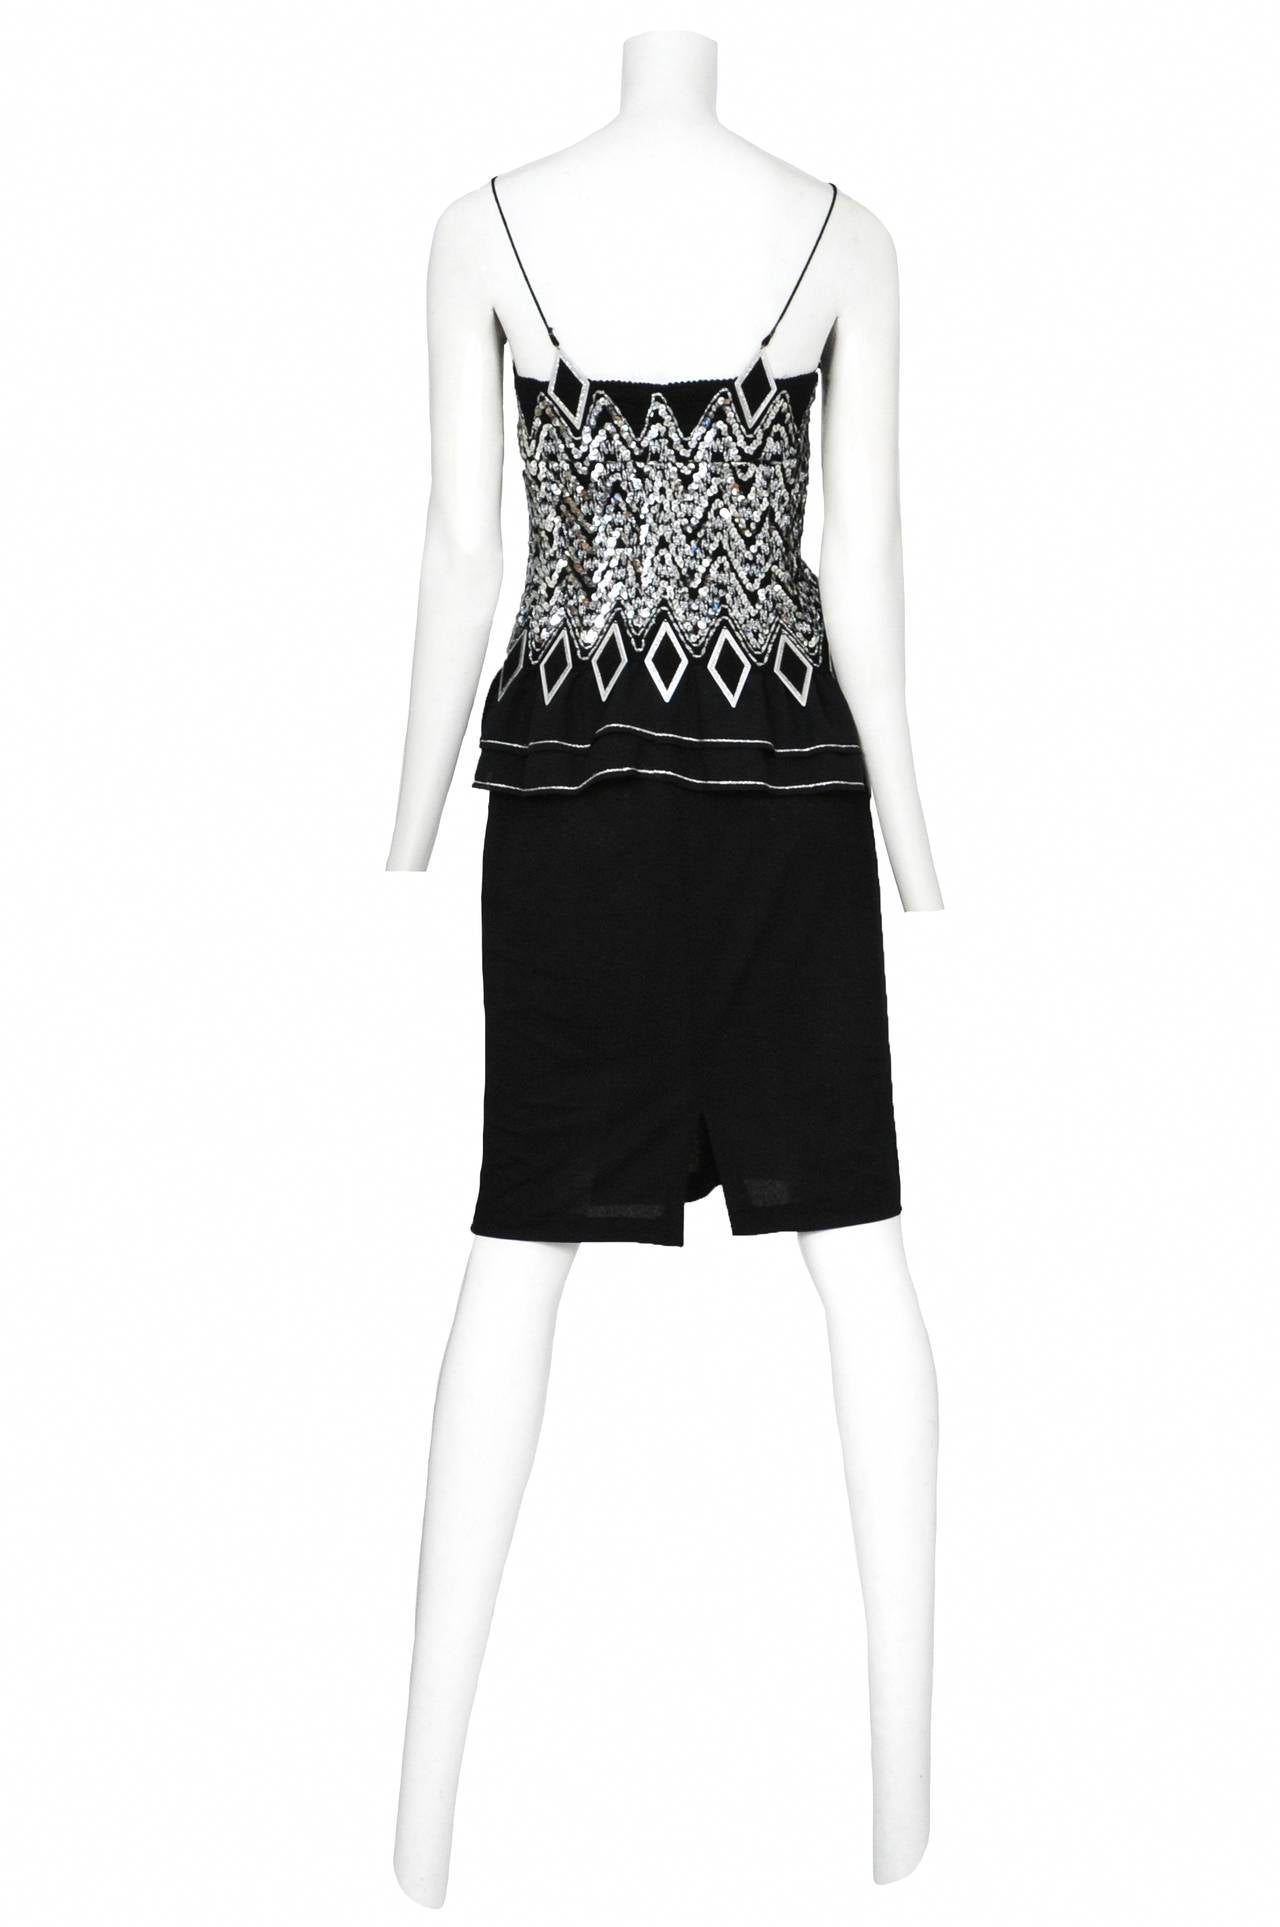 Vintage Jacques Cassia black knit ensemble featuring a spaghetti strap camisole adorned with silver sequins and metallic embroidery over intricate smocking as well as architectural black and silver diamond plates decorating the hem and straps. The